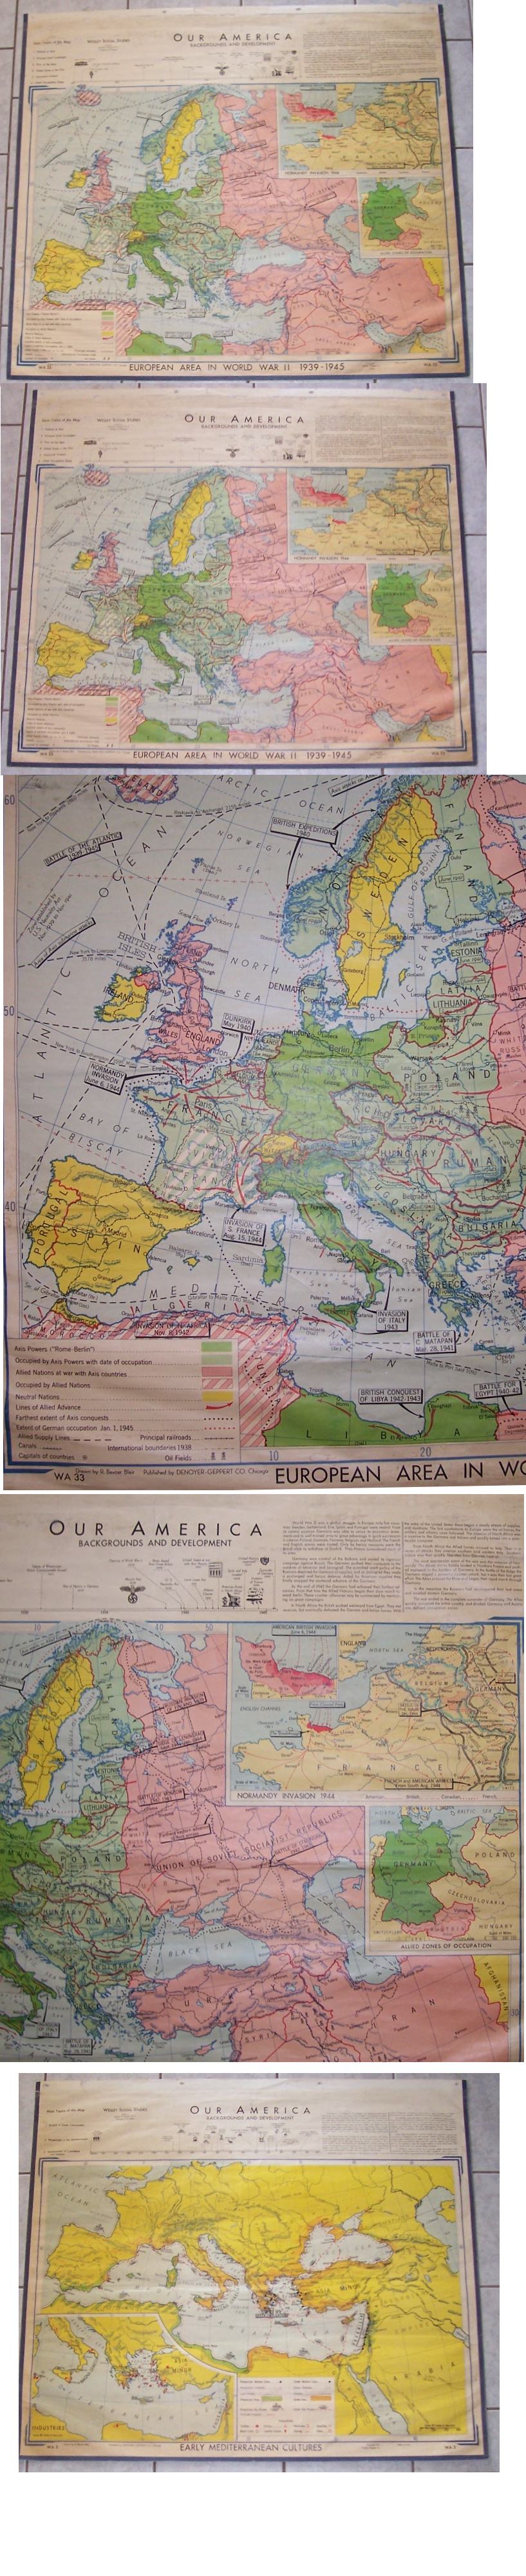 US School Study Map Of WWII Europe